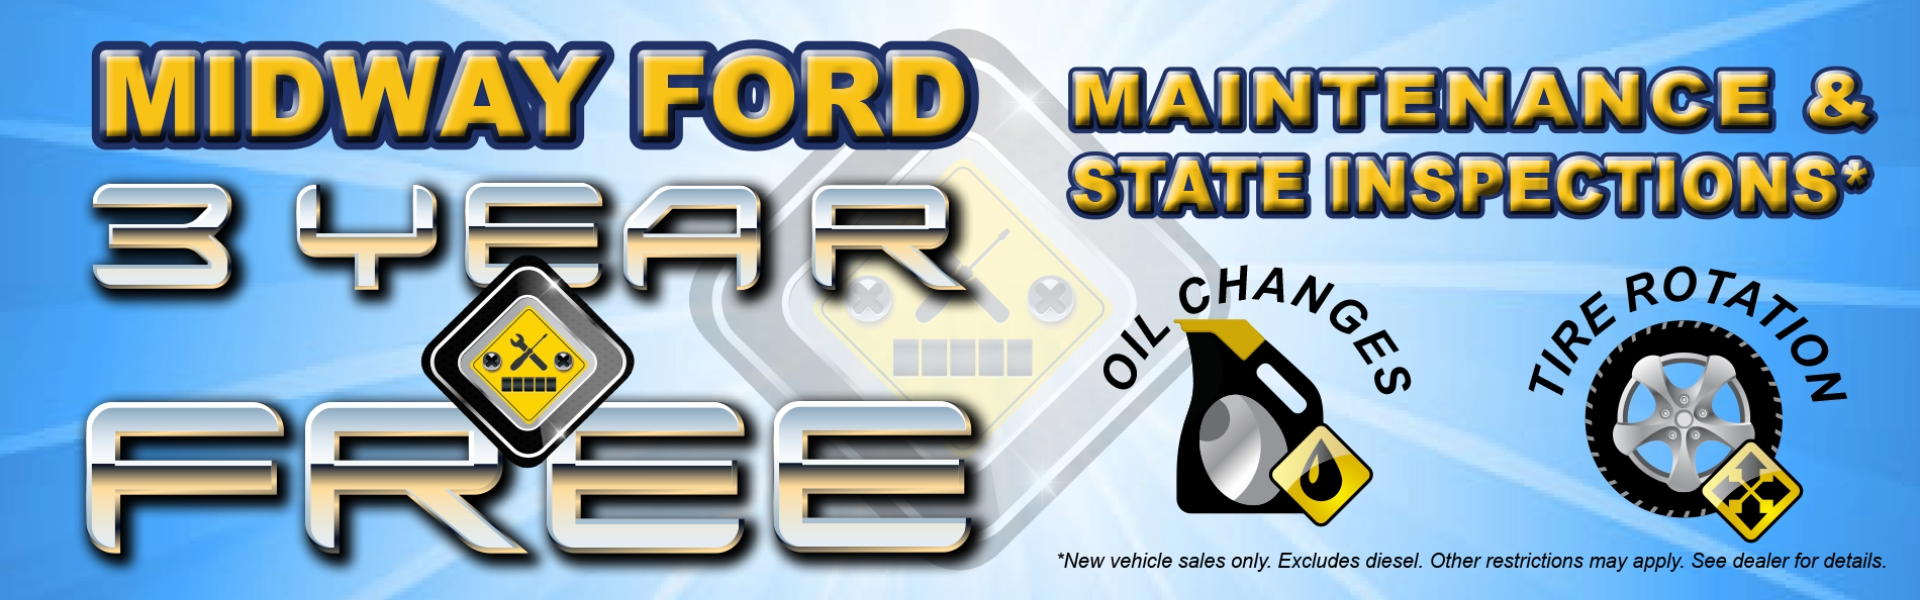 Midway Ford 3 year Free Maintenance offer